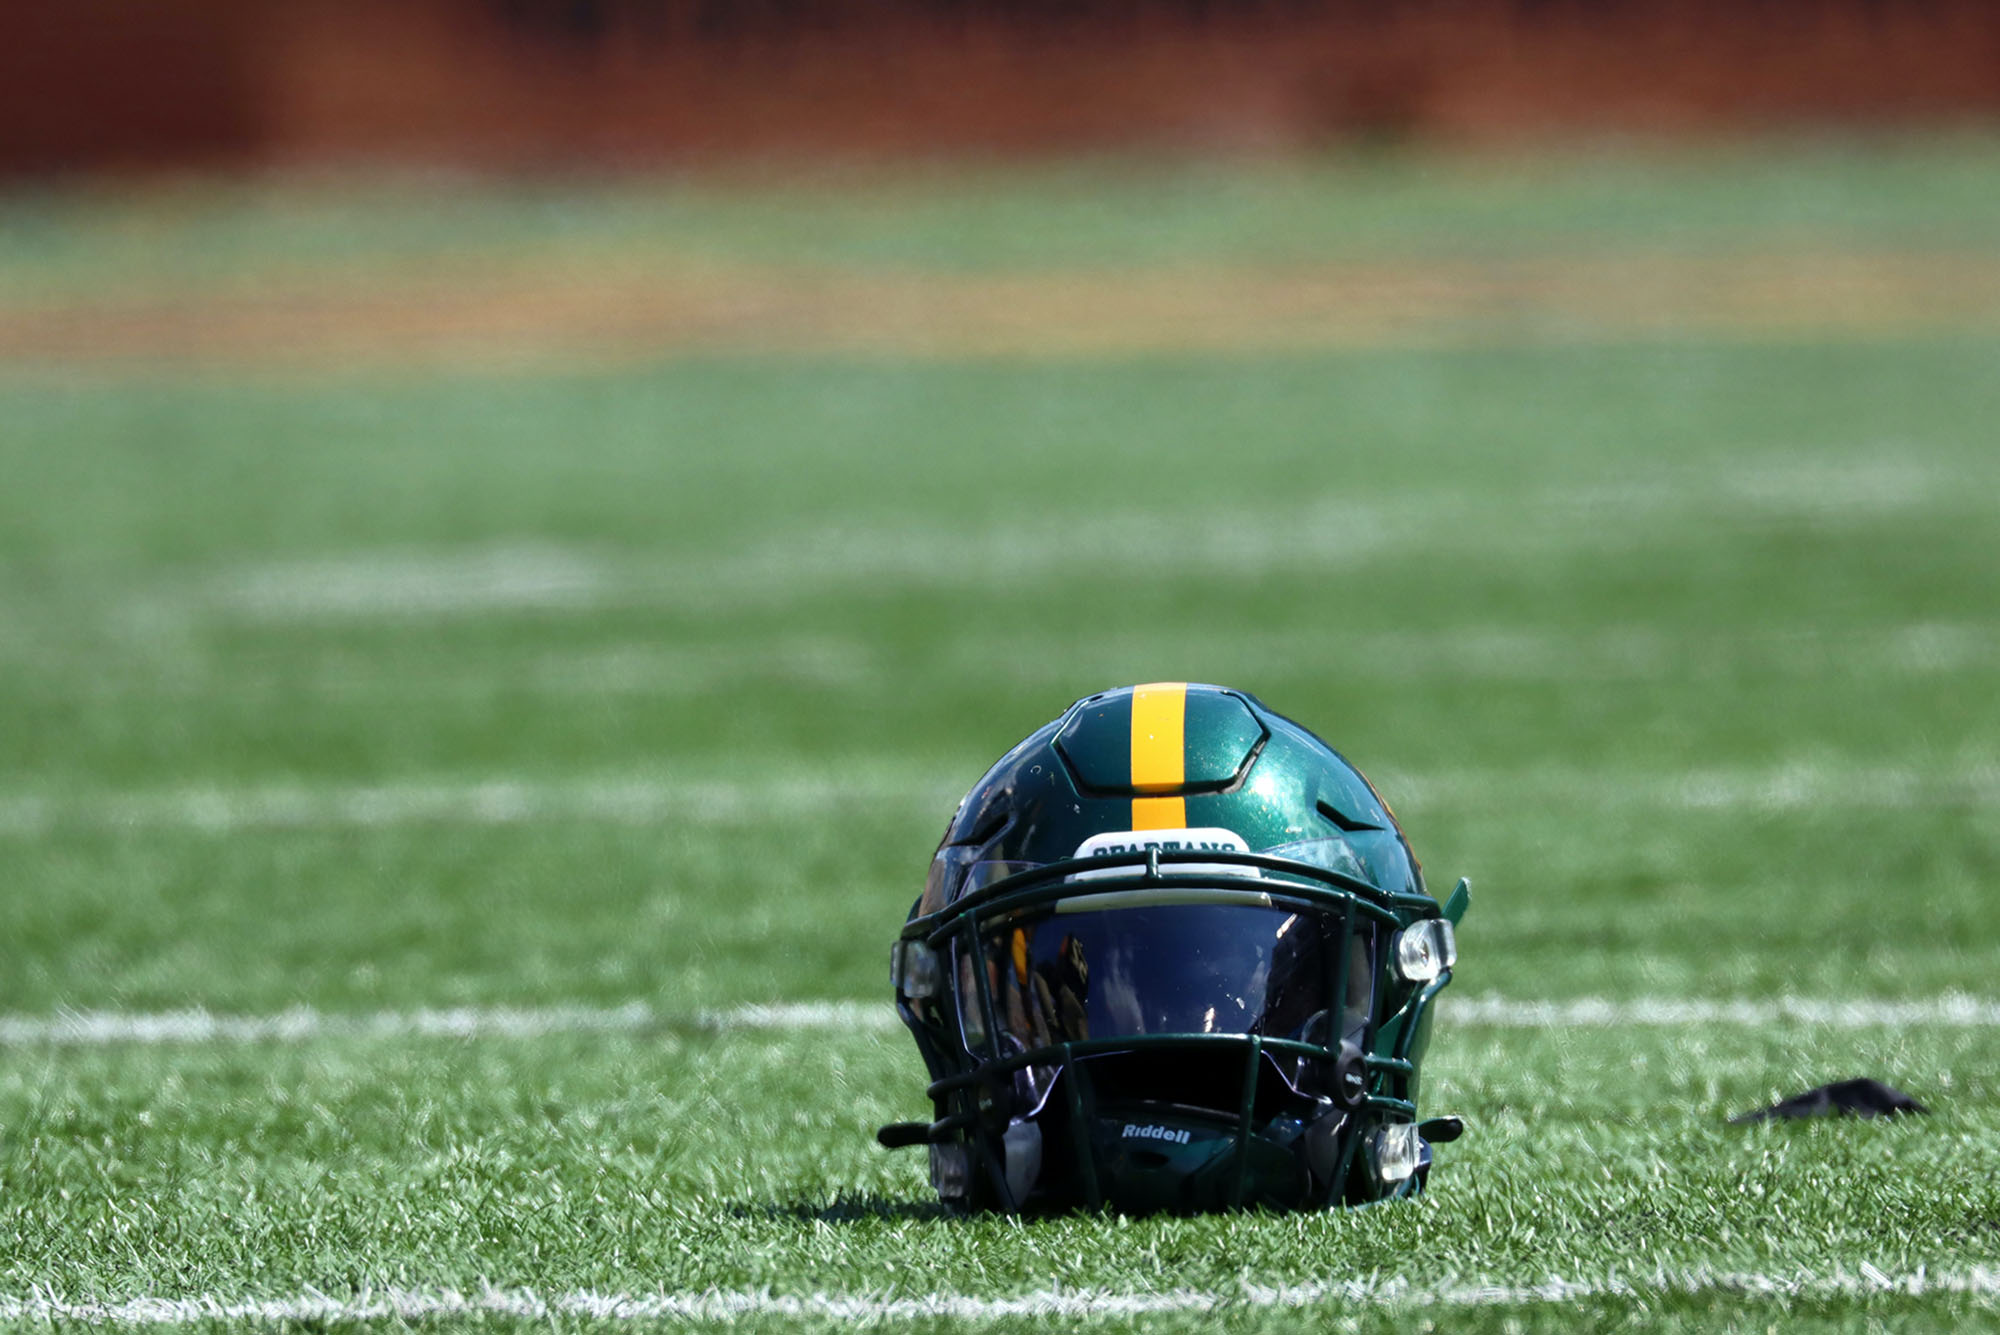 Photo of a green and yellow helmet sitting on a green turf football field.